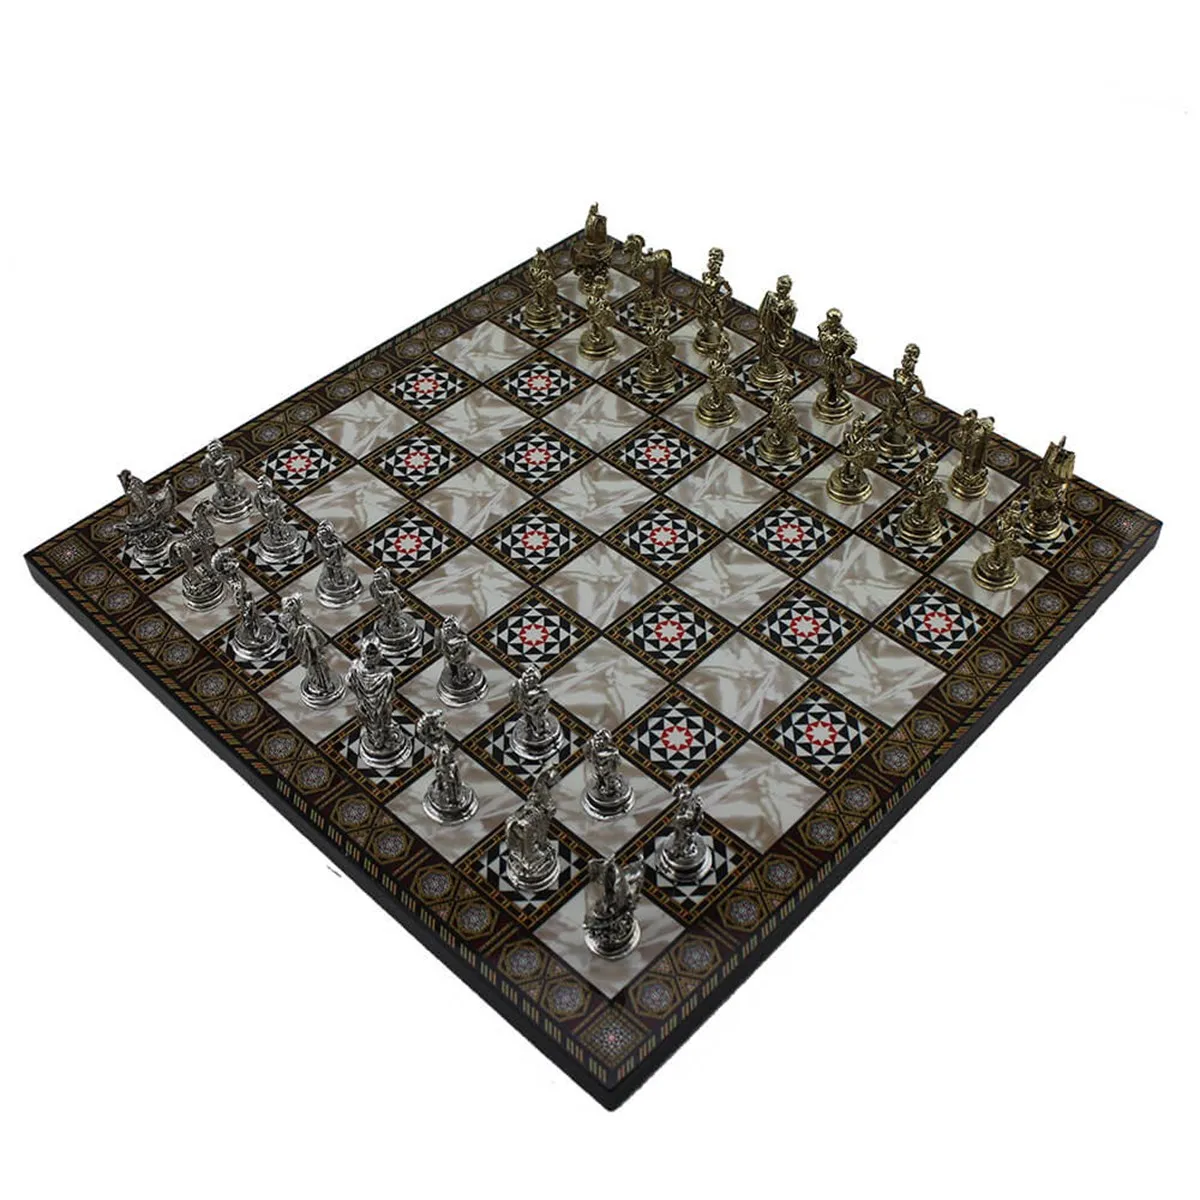 Small Size Metal Trojans Chess Set and Small Board with Nacre Pattern 30x30 cm the yulong soie de nacre